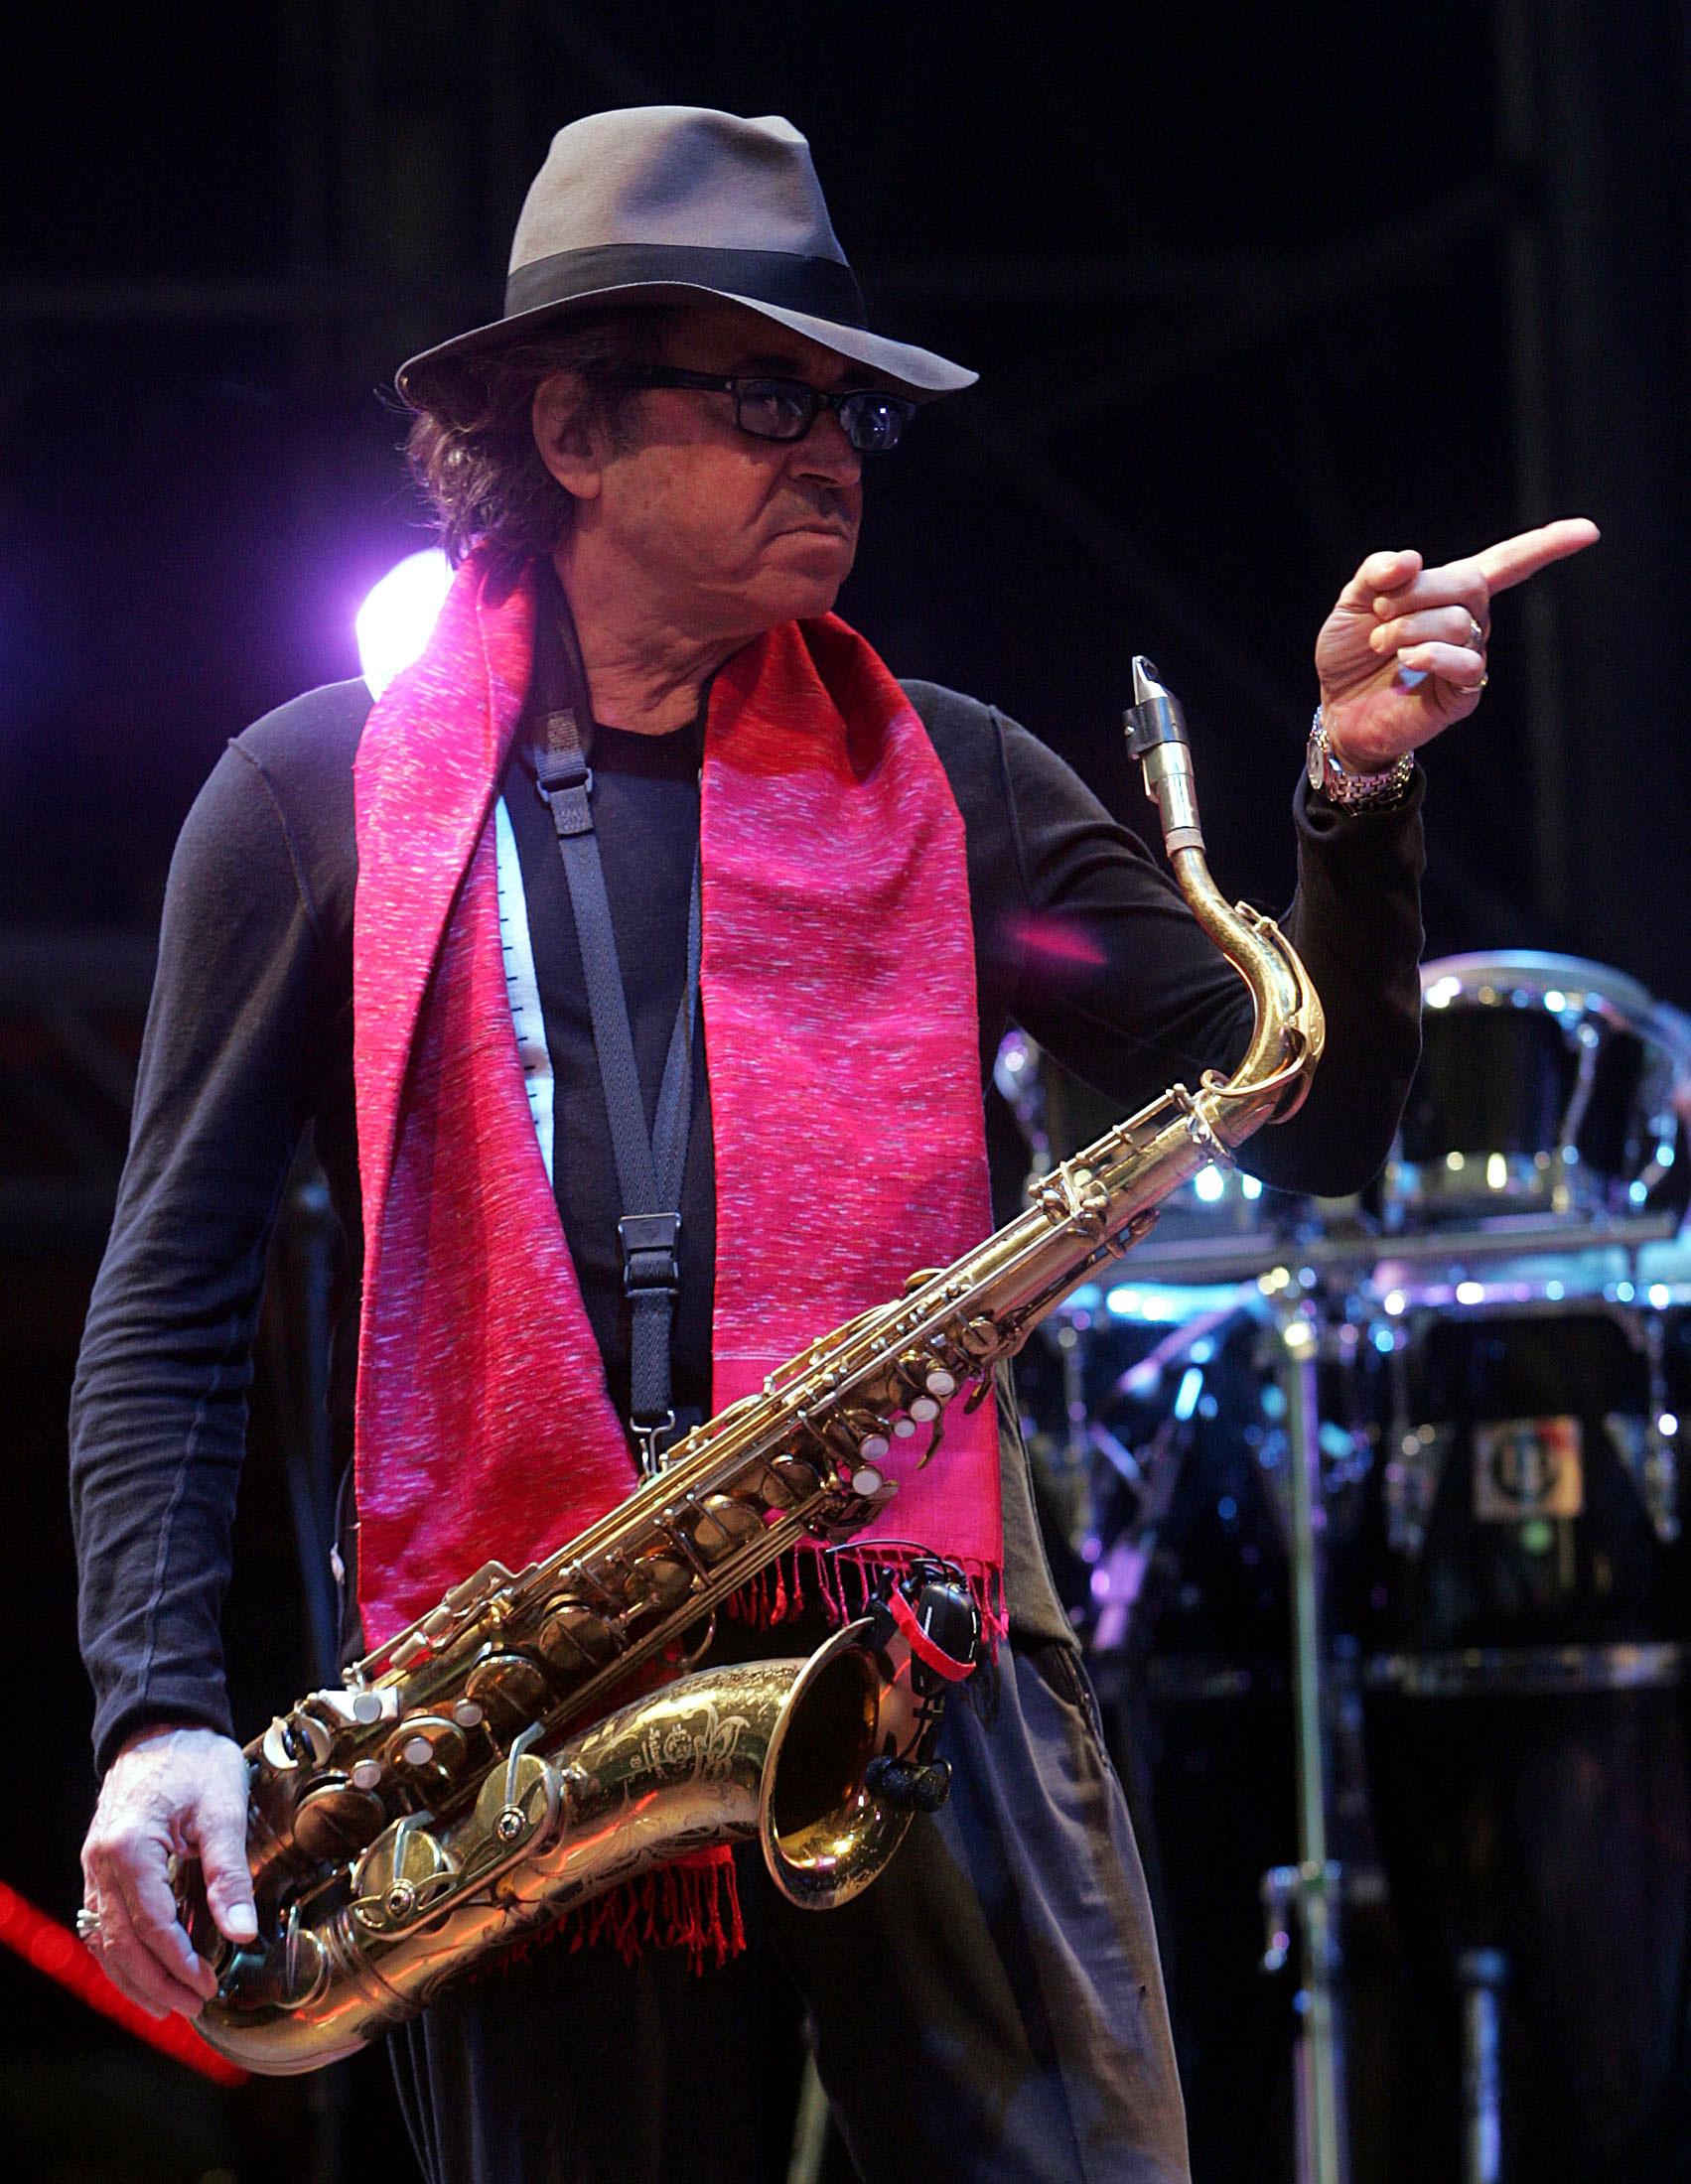 Gato Barbieri performs on stage at the annual Jazz Festival in Wiesen, Austria. July 2005.